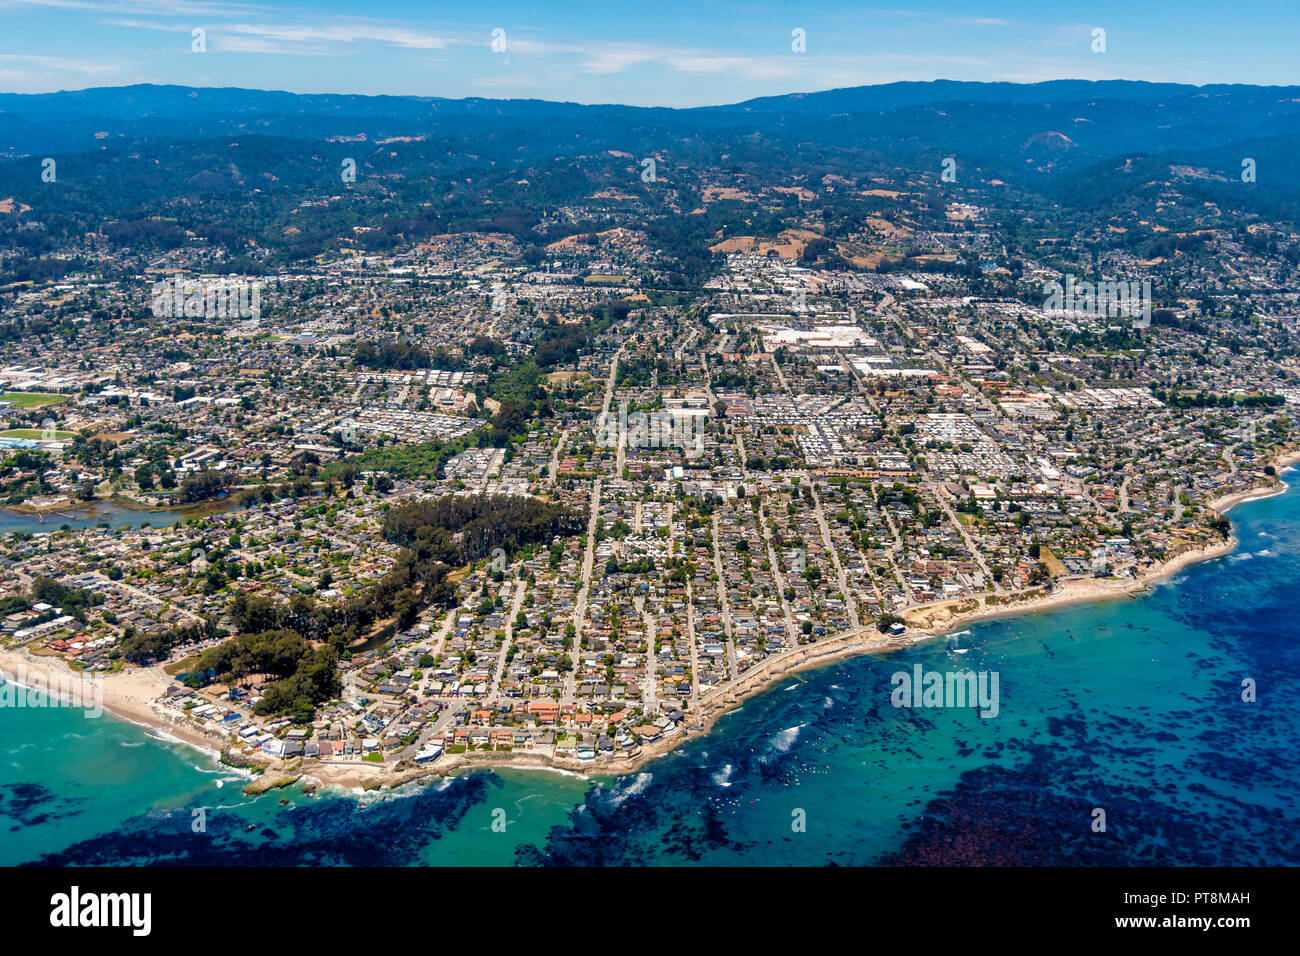 The aerial view of the city of Santa Cruz in Northern California on a sunny day. Stock Photo